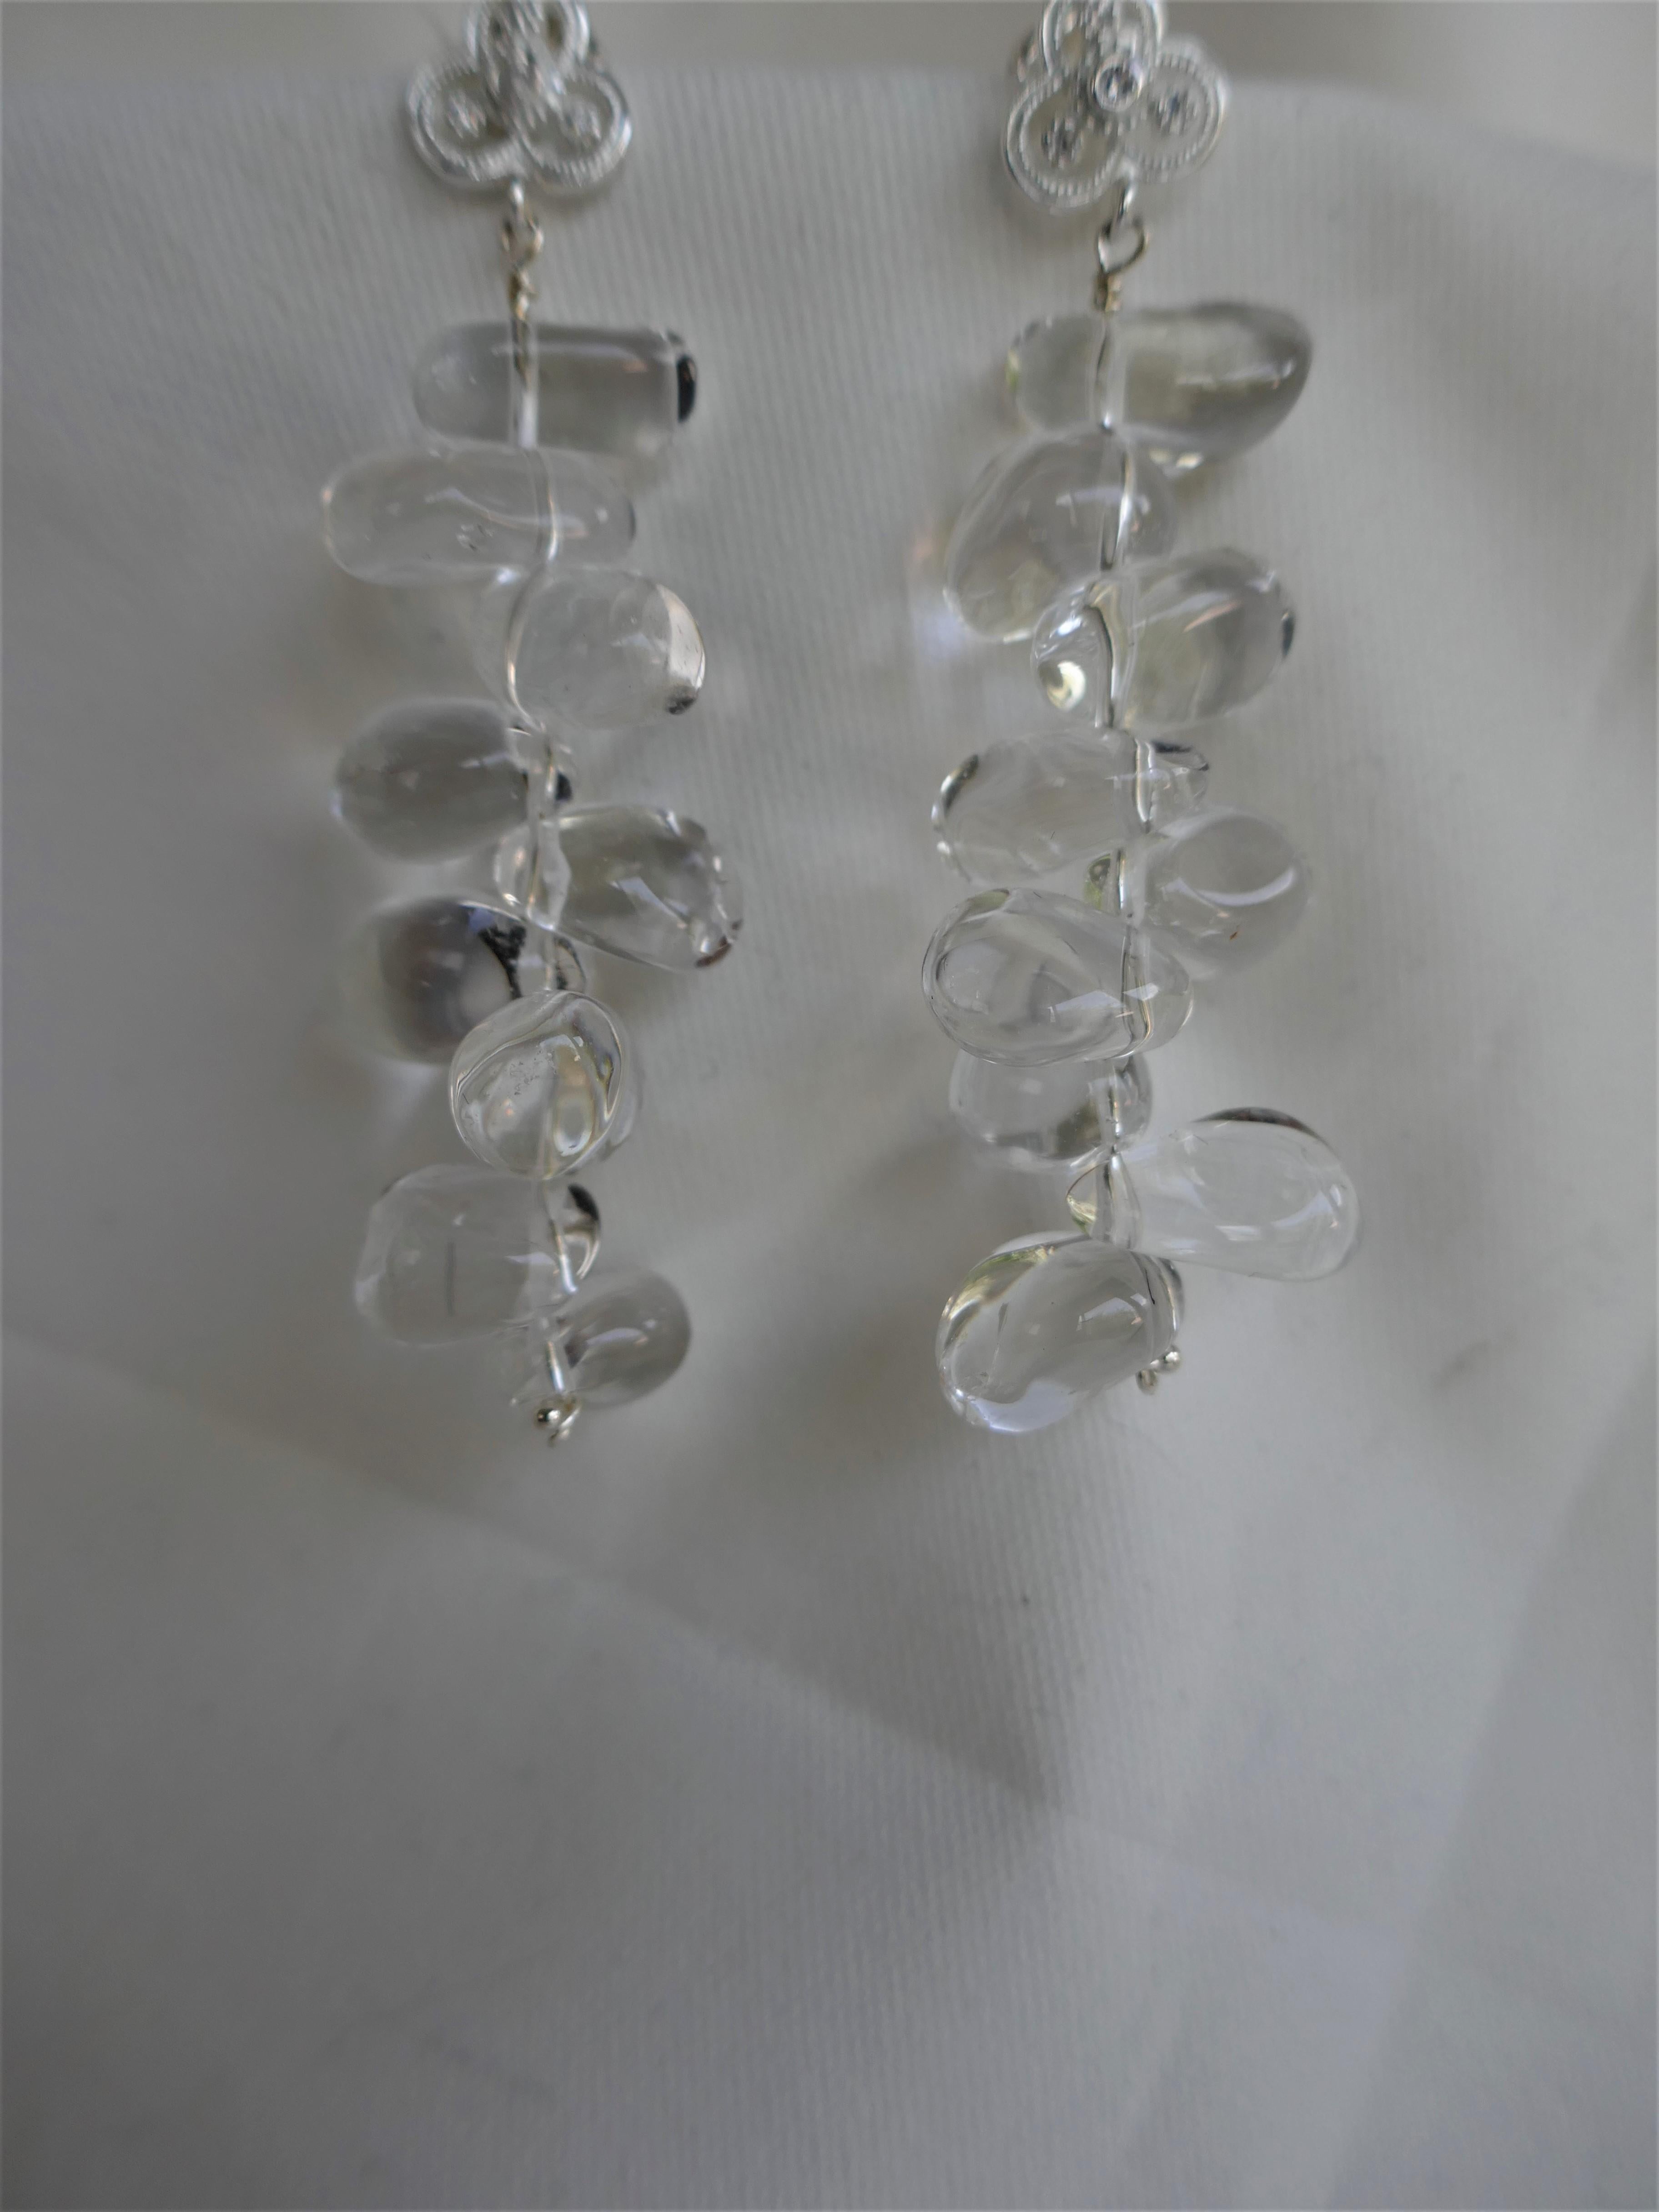 These earrings are so wearable and look beautiful on. Limited edition. The rock crystal nuggets are great quality and hang from 925 sterling silver and cubic zirconia post. The post are push backs. The earrings are 2 5/8th inches long. Designed and